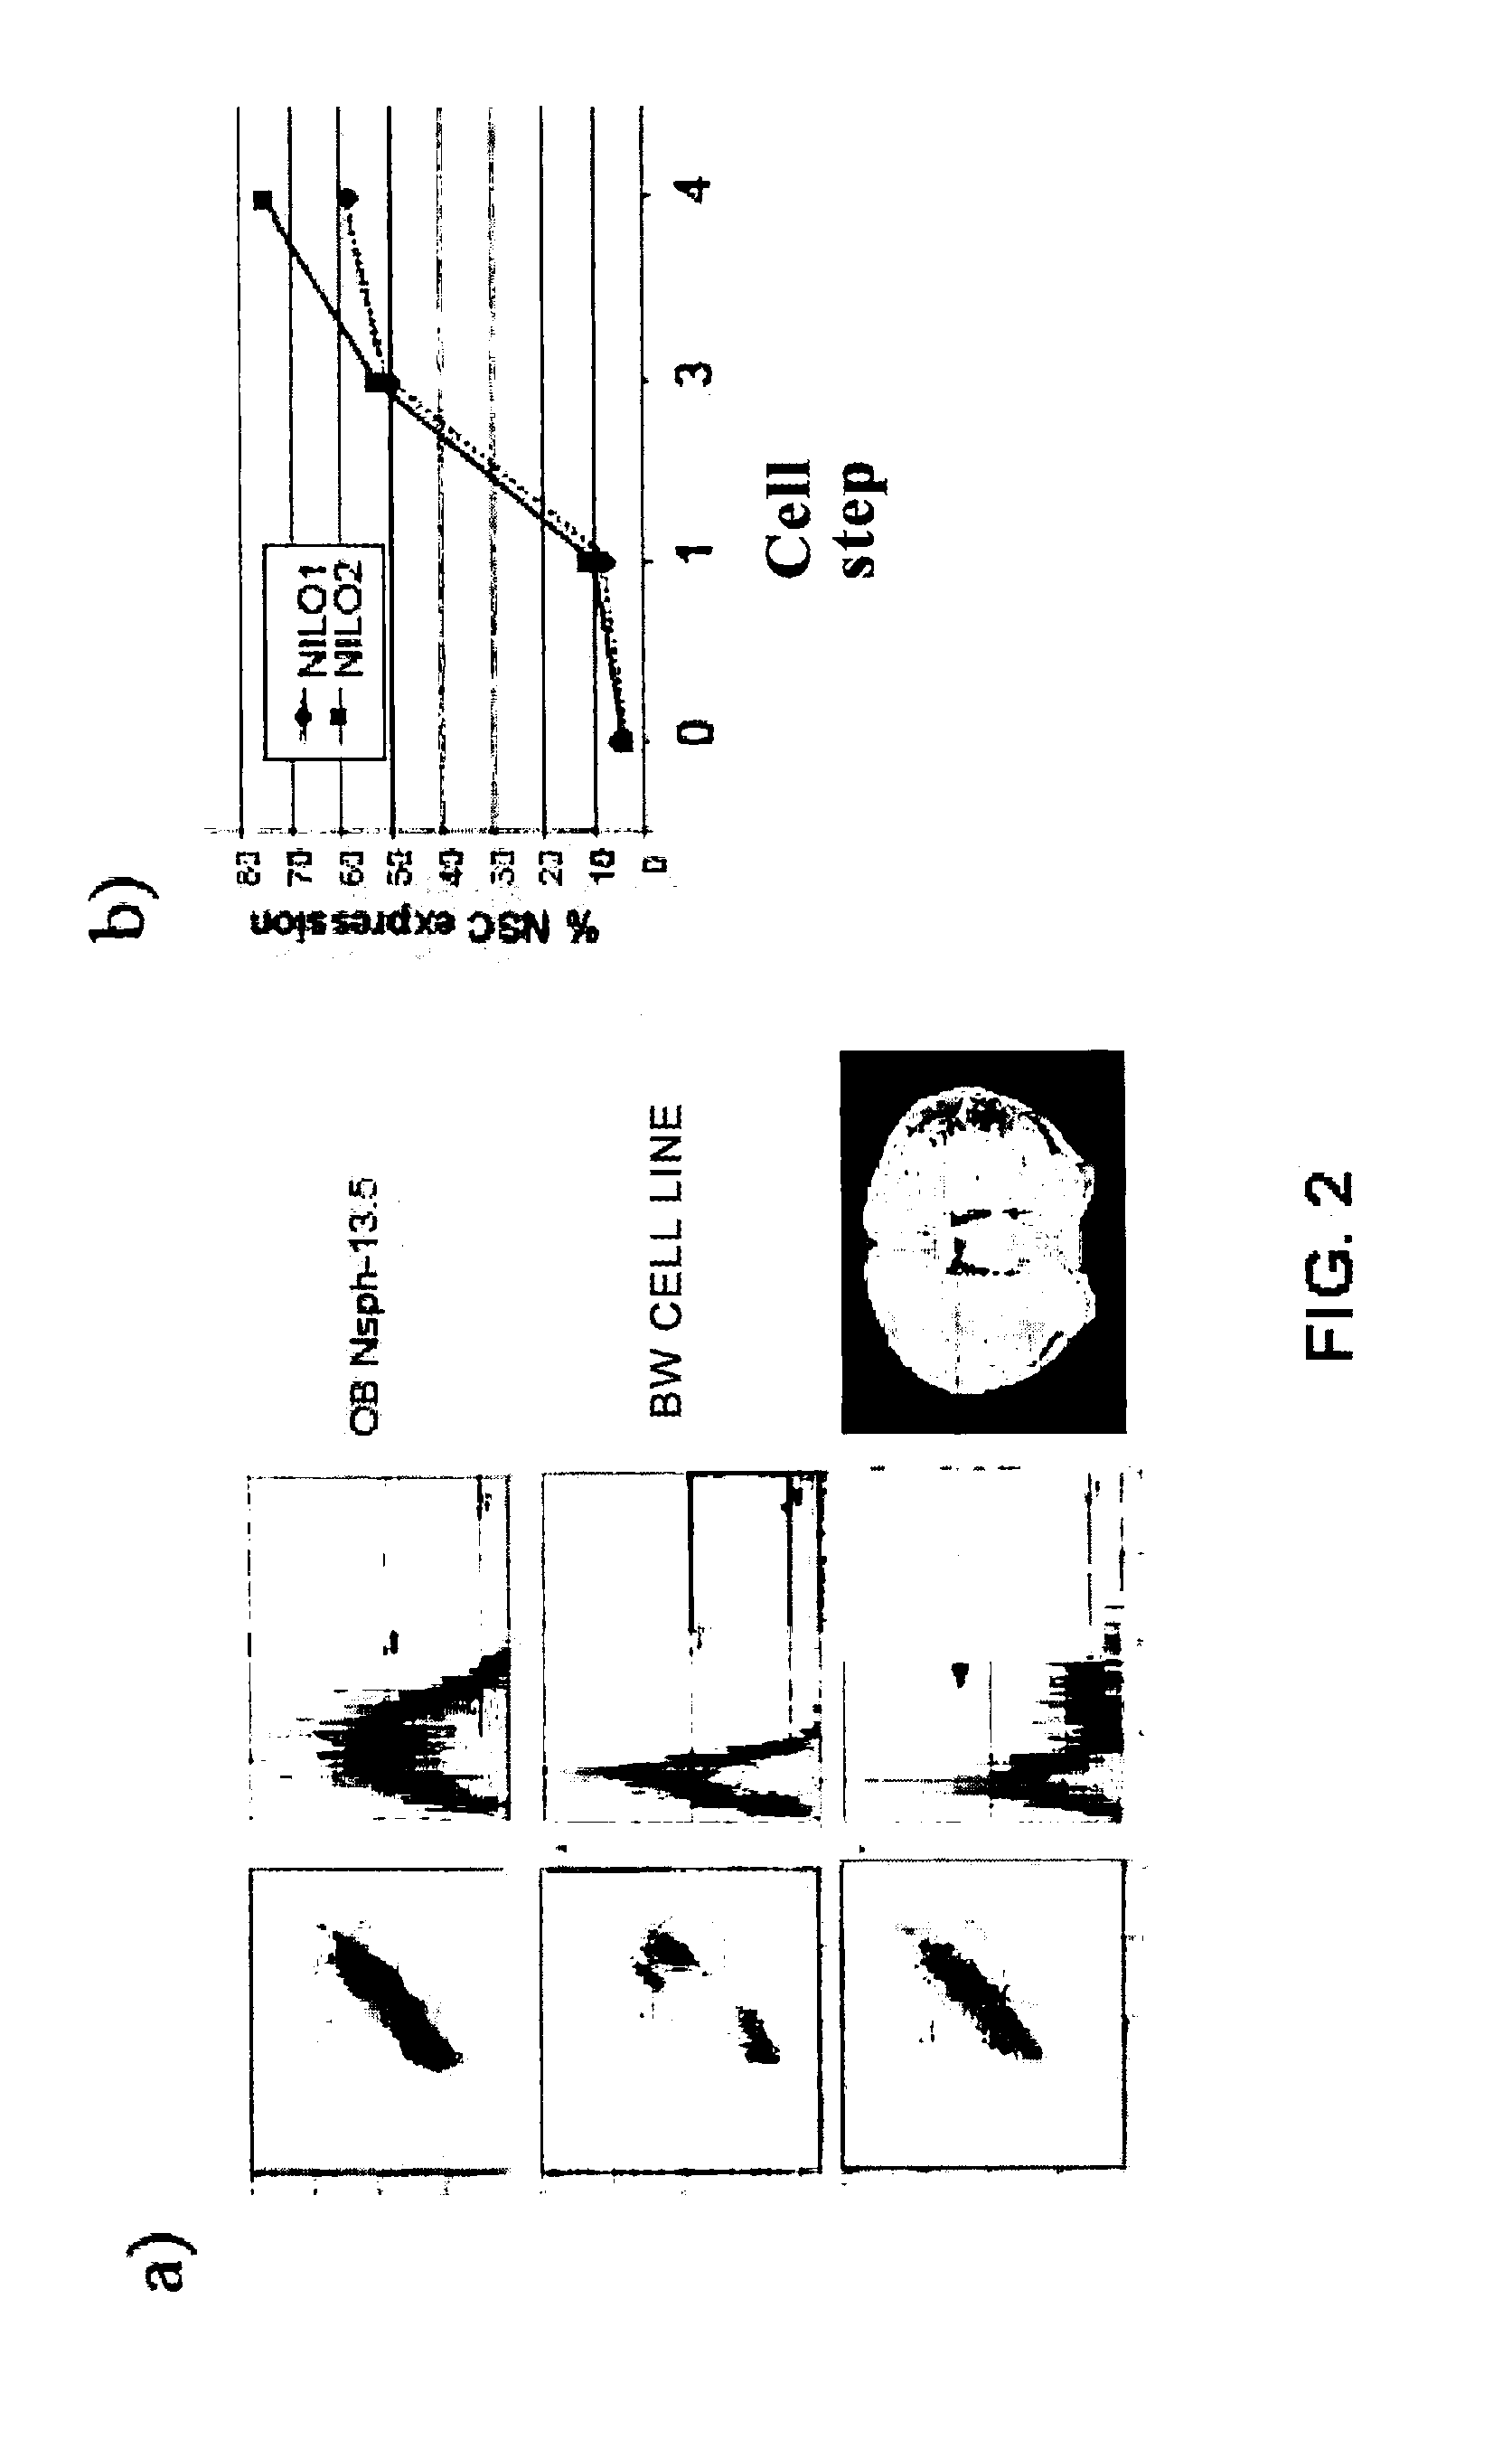 Method for generating monoclonal antibodies that recognize progenitor cells